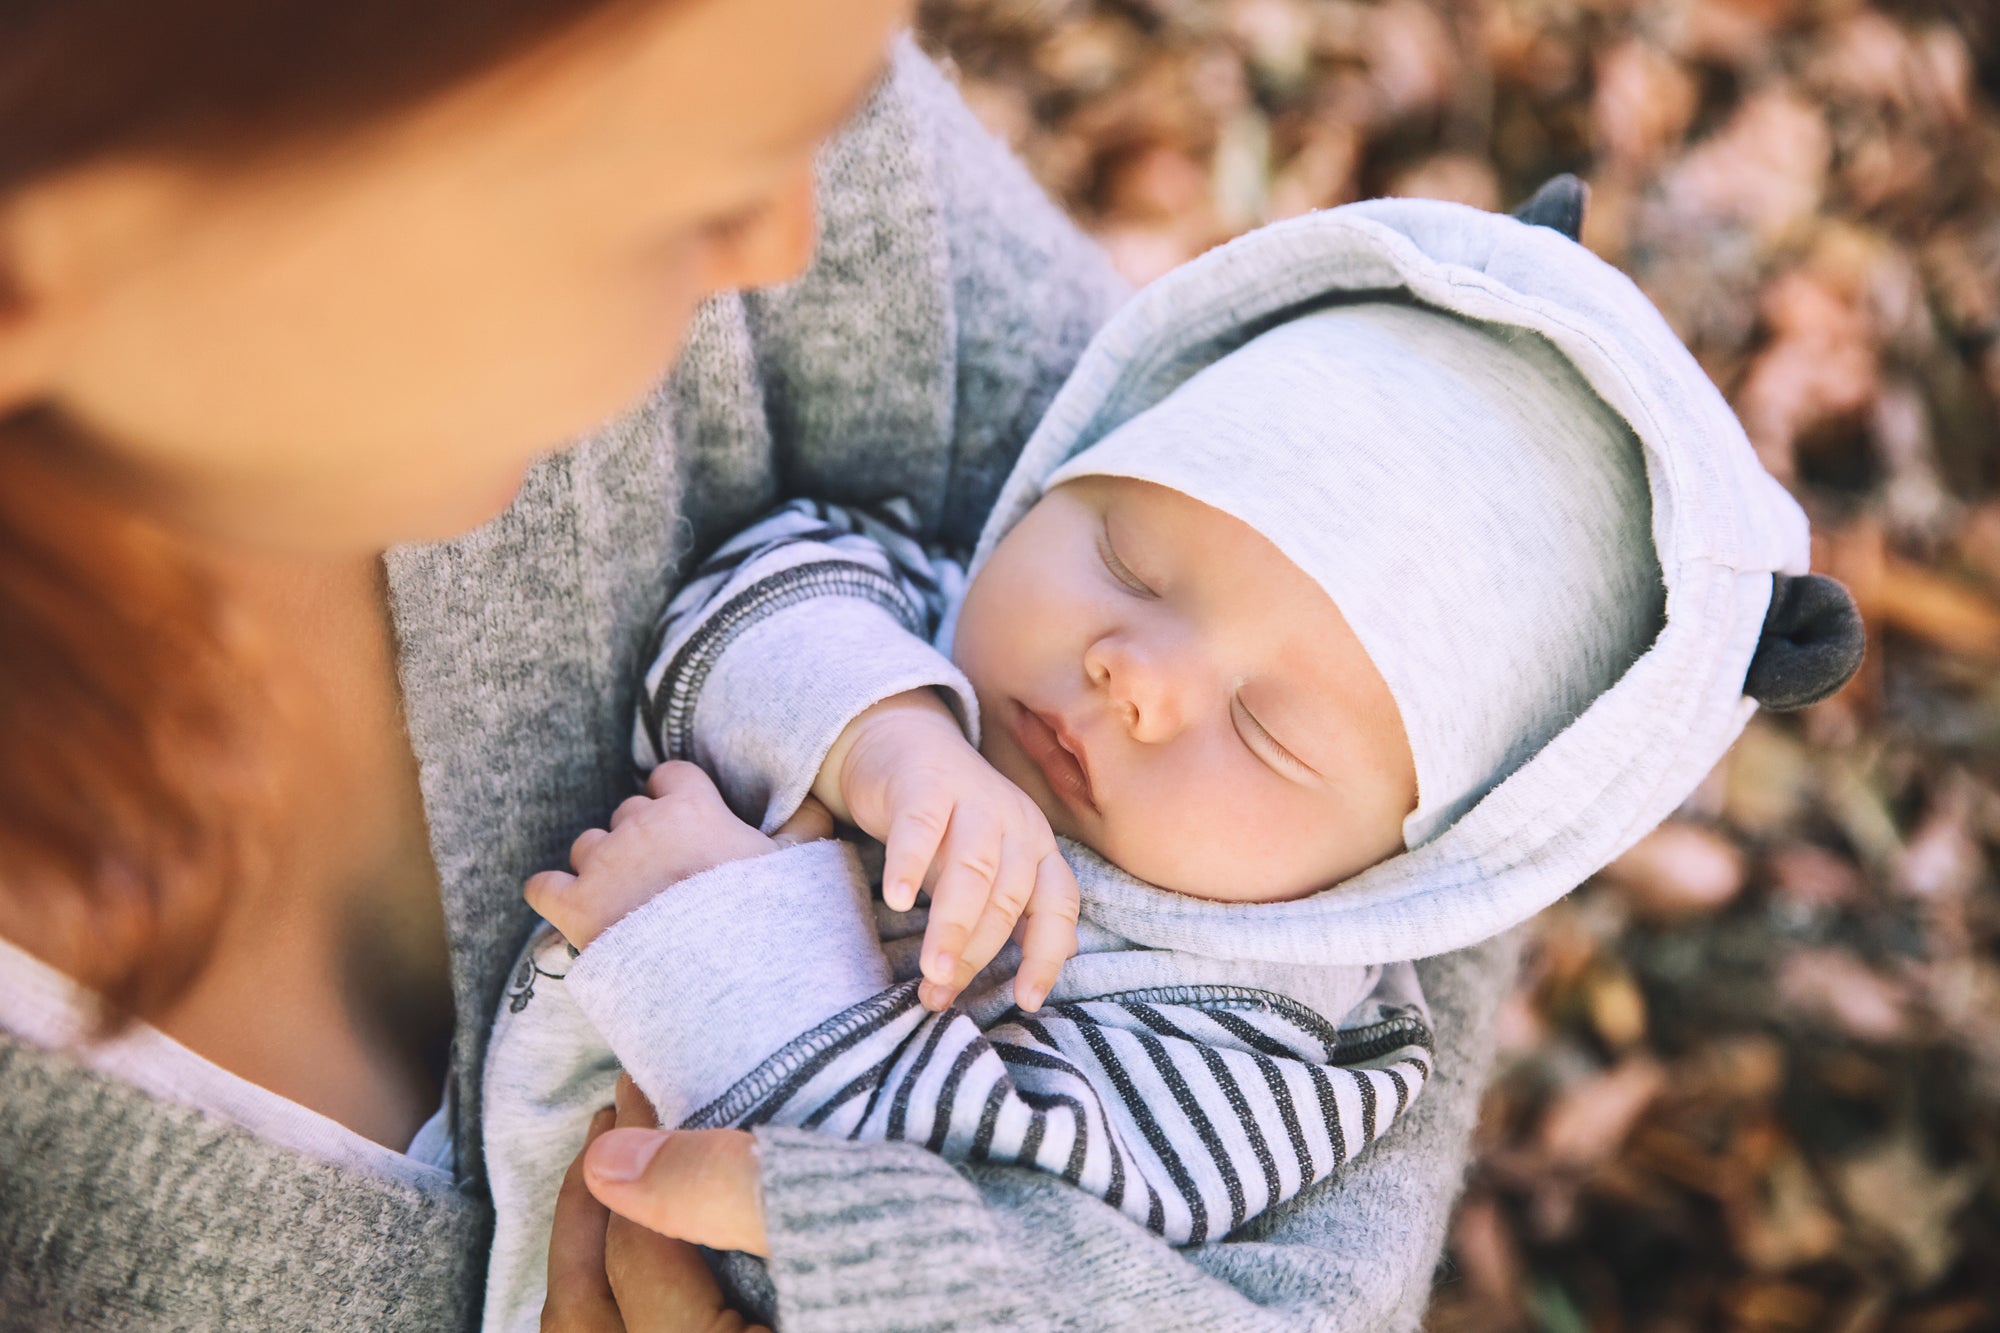 5 Great Outings You CAN Do With Your Newborn